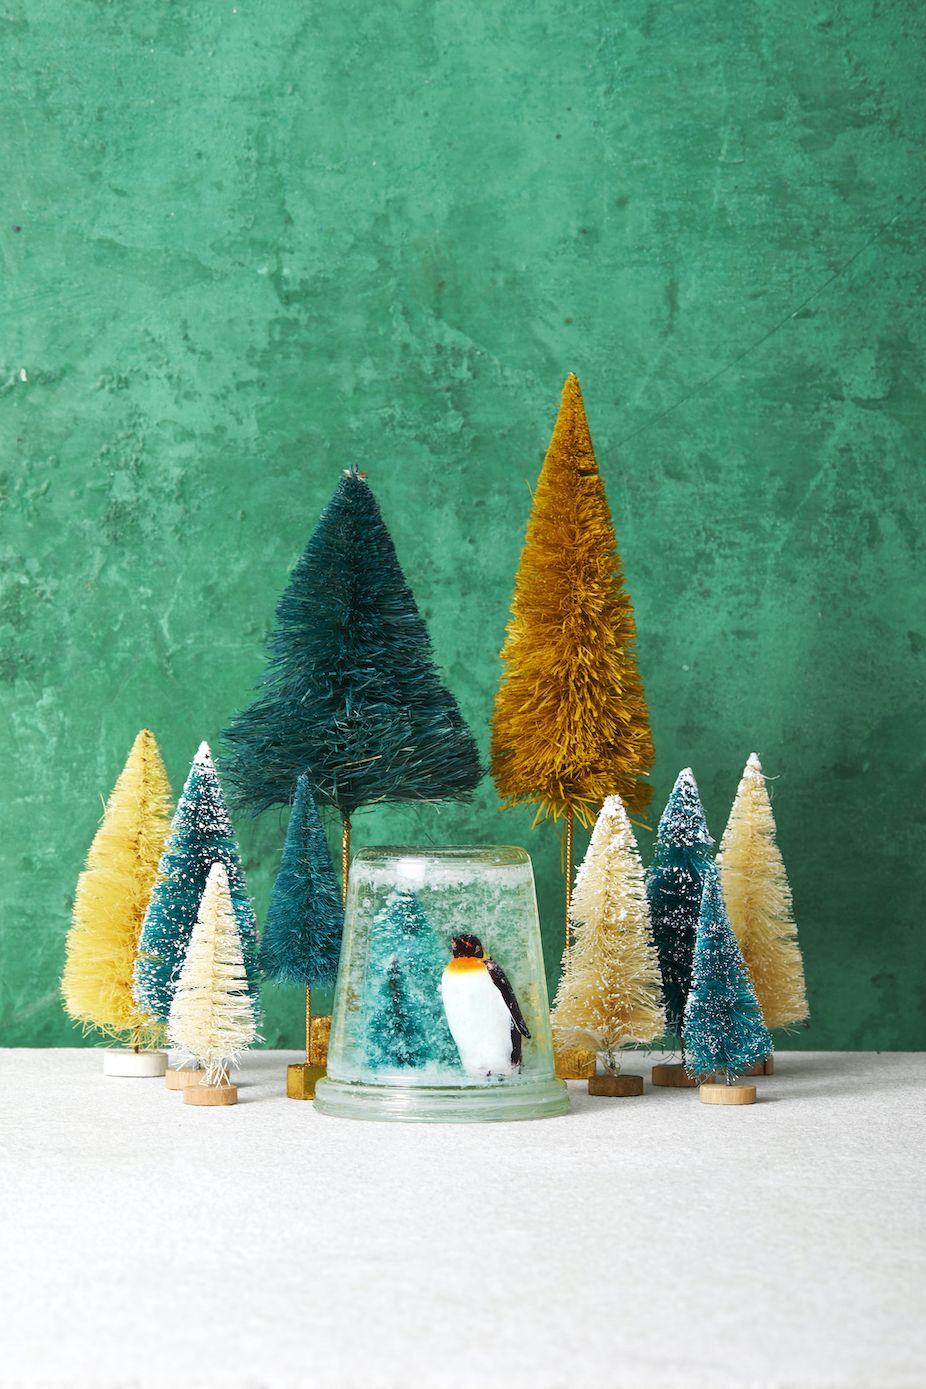 40 Best Christmas Crafts Kids Can Easily Make in 2023